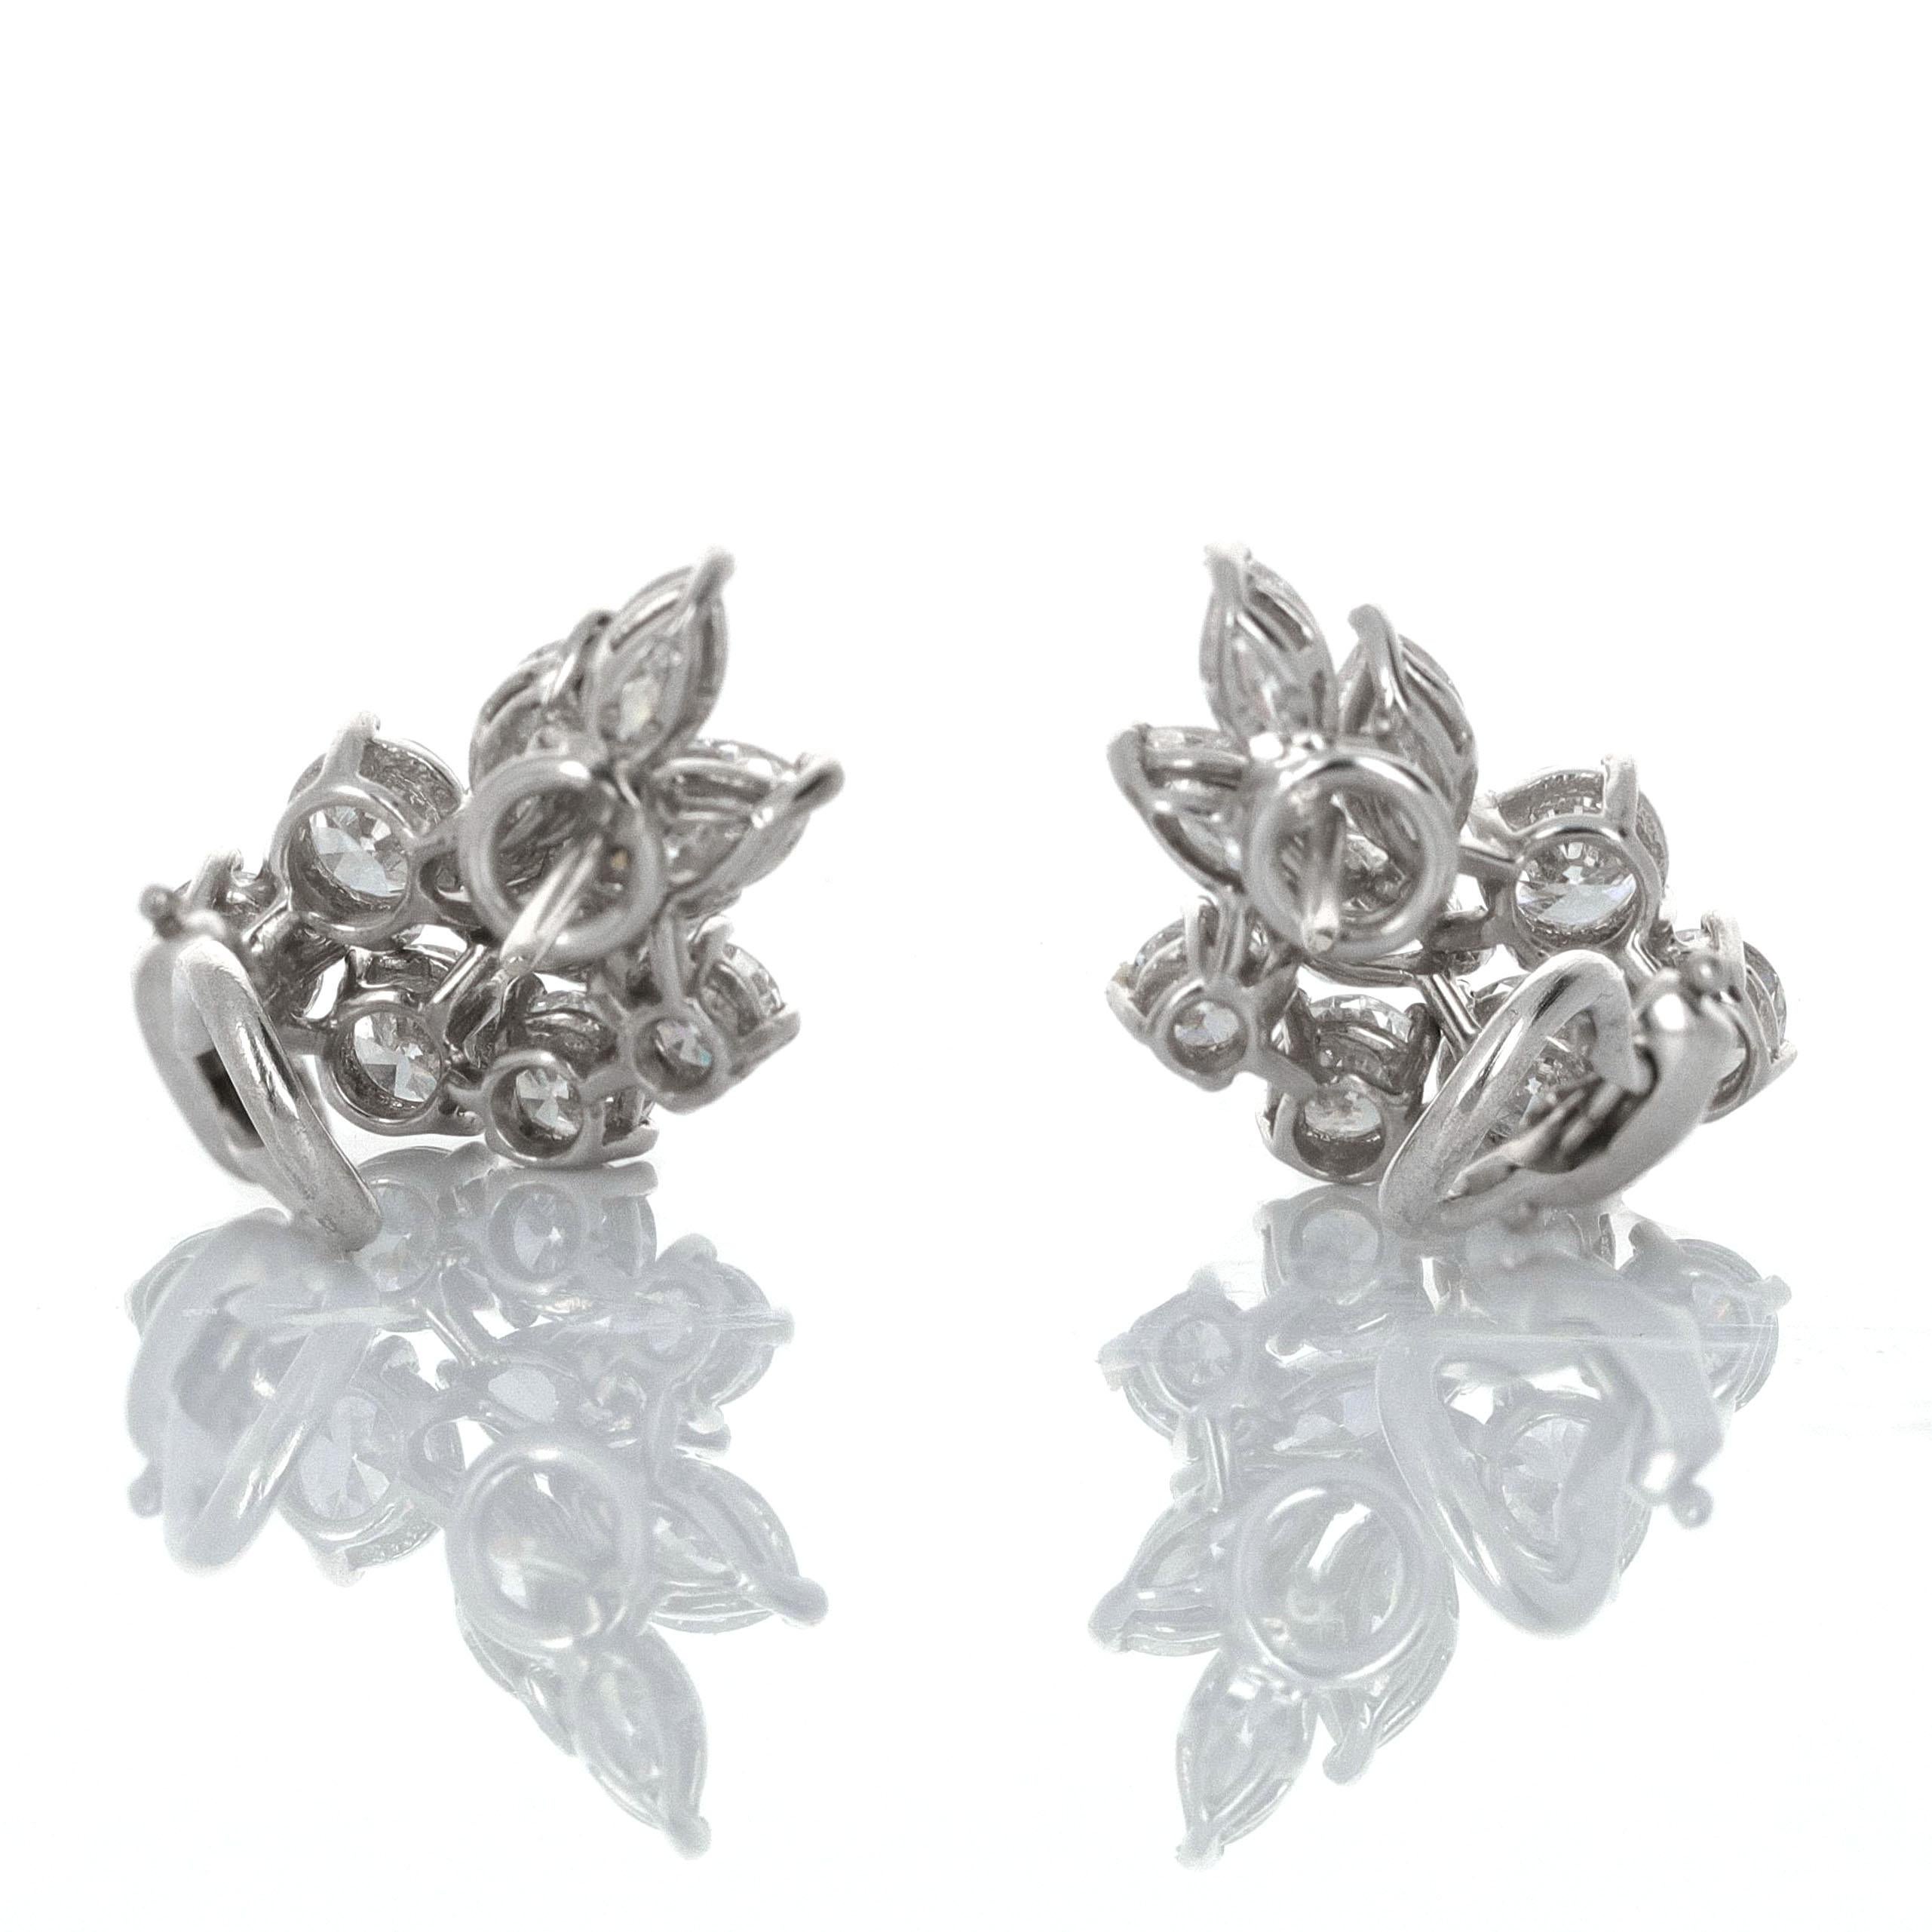 1 8 karat white gold diamond cluster earrings. There is an estimated 4.00 carats total weight. The earrings are composed of round and marquise shaped diamonds. The Diamonds are white in color and eye clean
